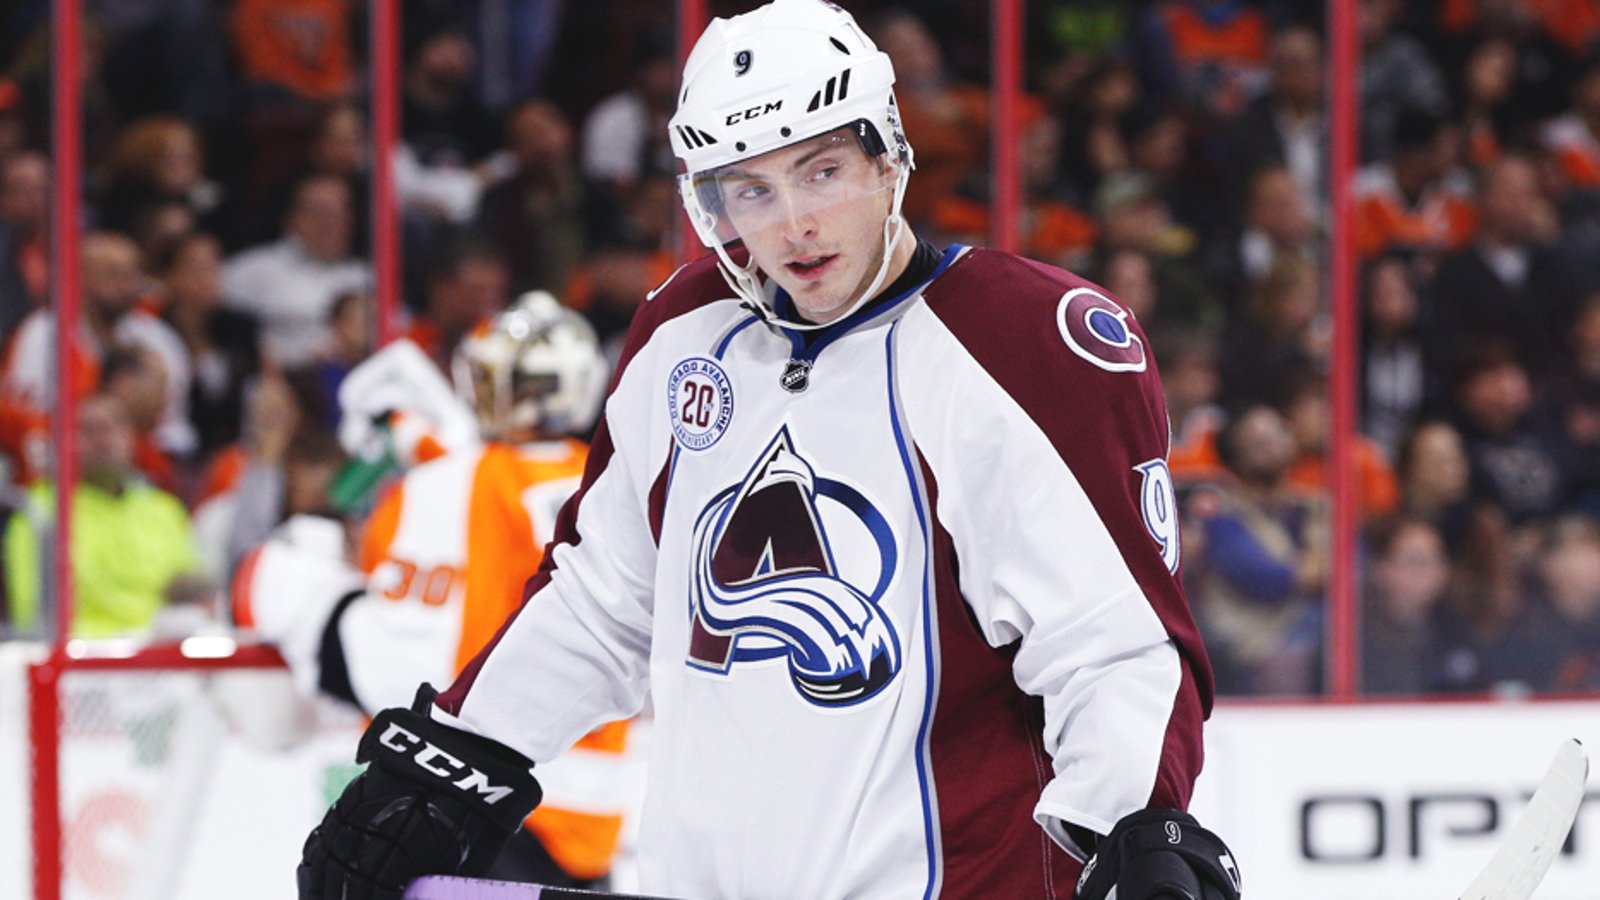 Rumor: Top Insiders continue to spread crazy info on Duchene's situation.